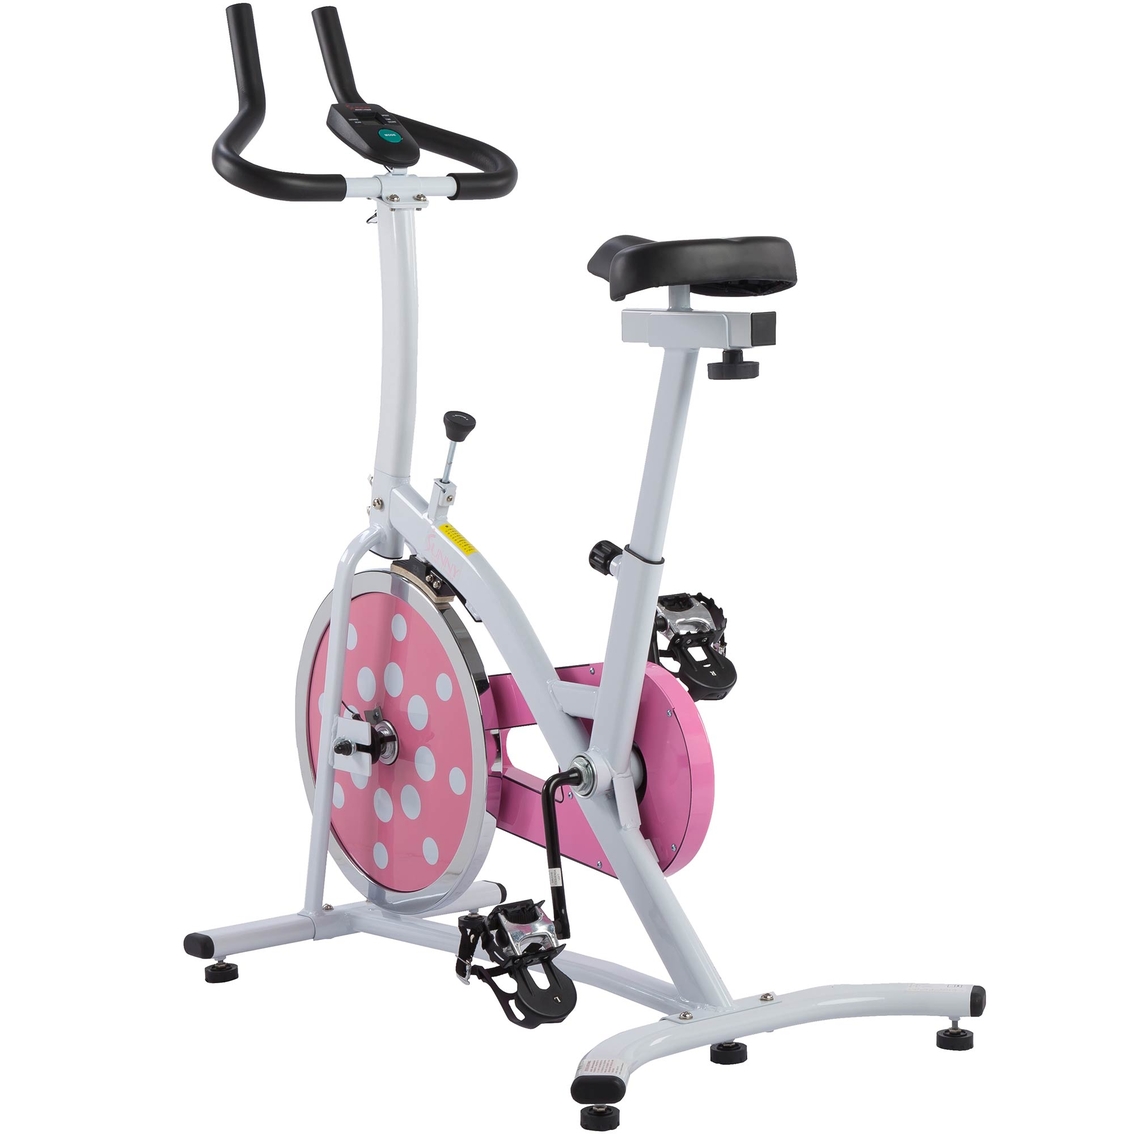 Sunny Health and Fitness Pink Indoor Cycling Bike - Image 4 of 4